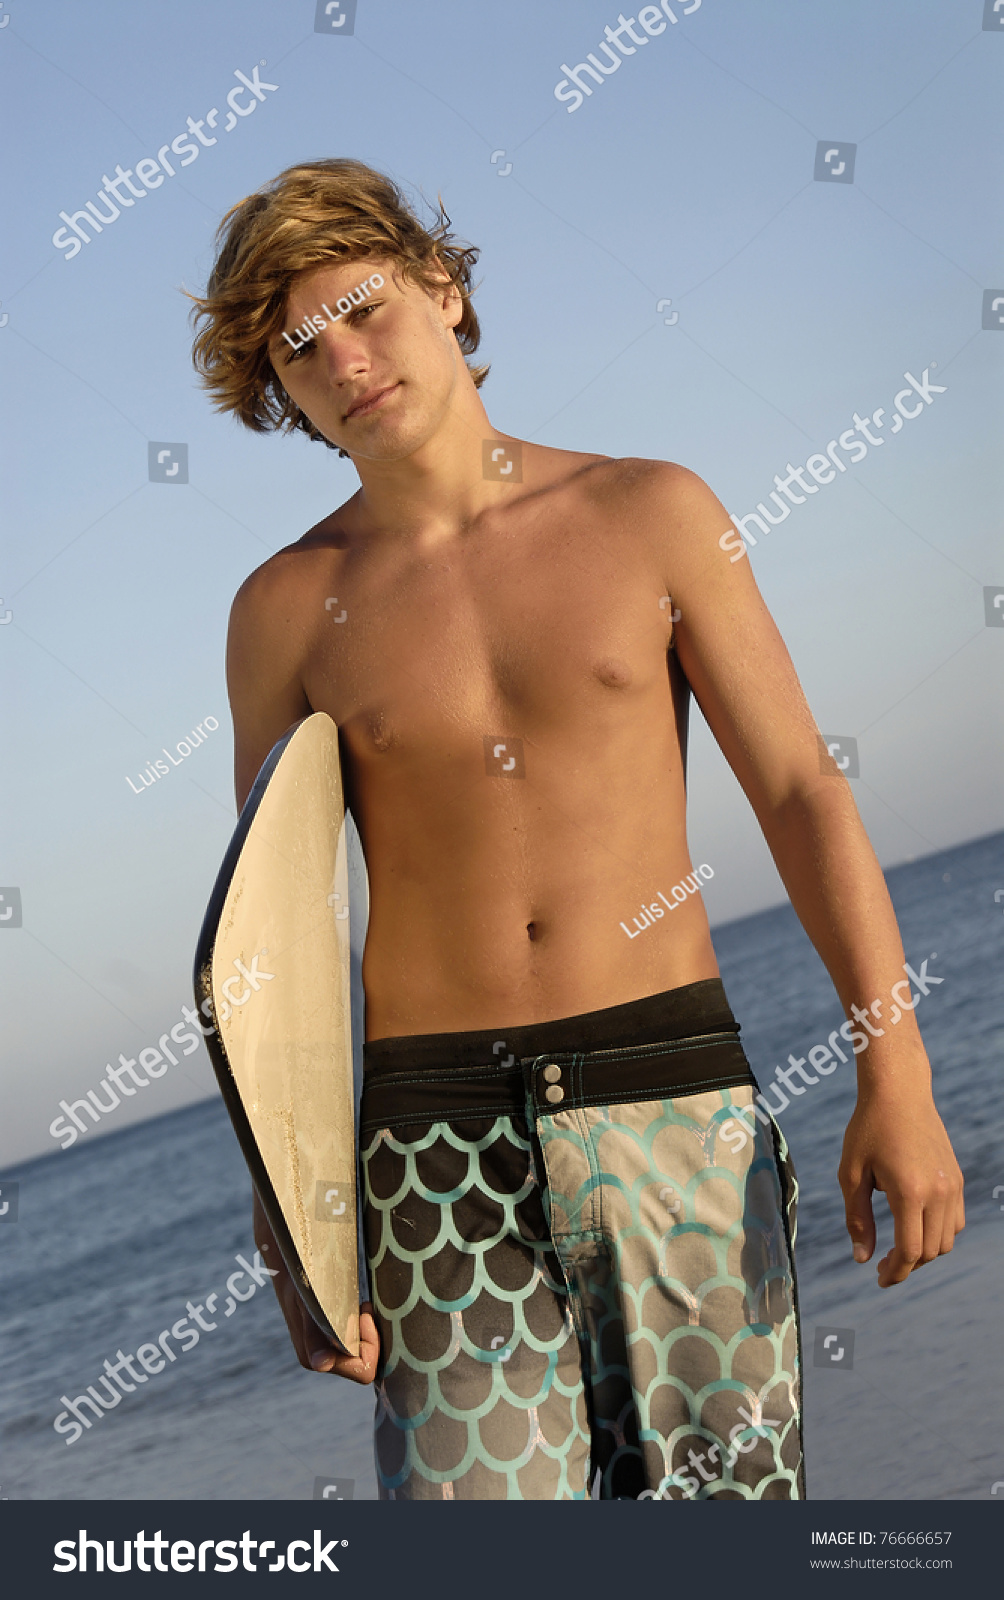 Handsome Surfer Posing In The Beach Stock Photo 76666657 : Shutterstock